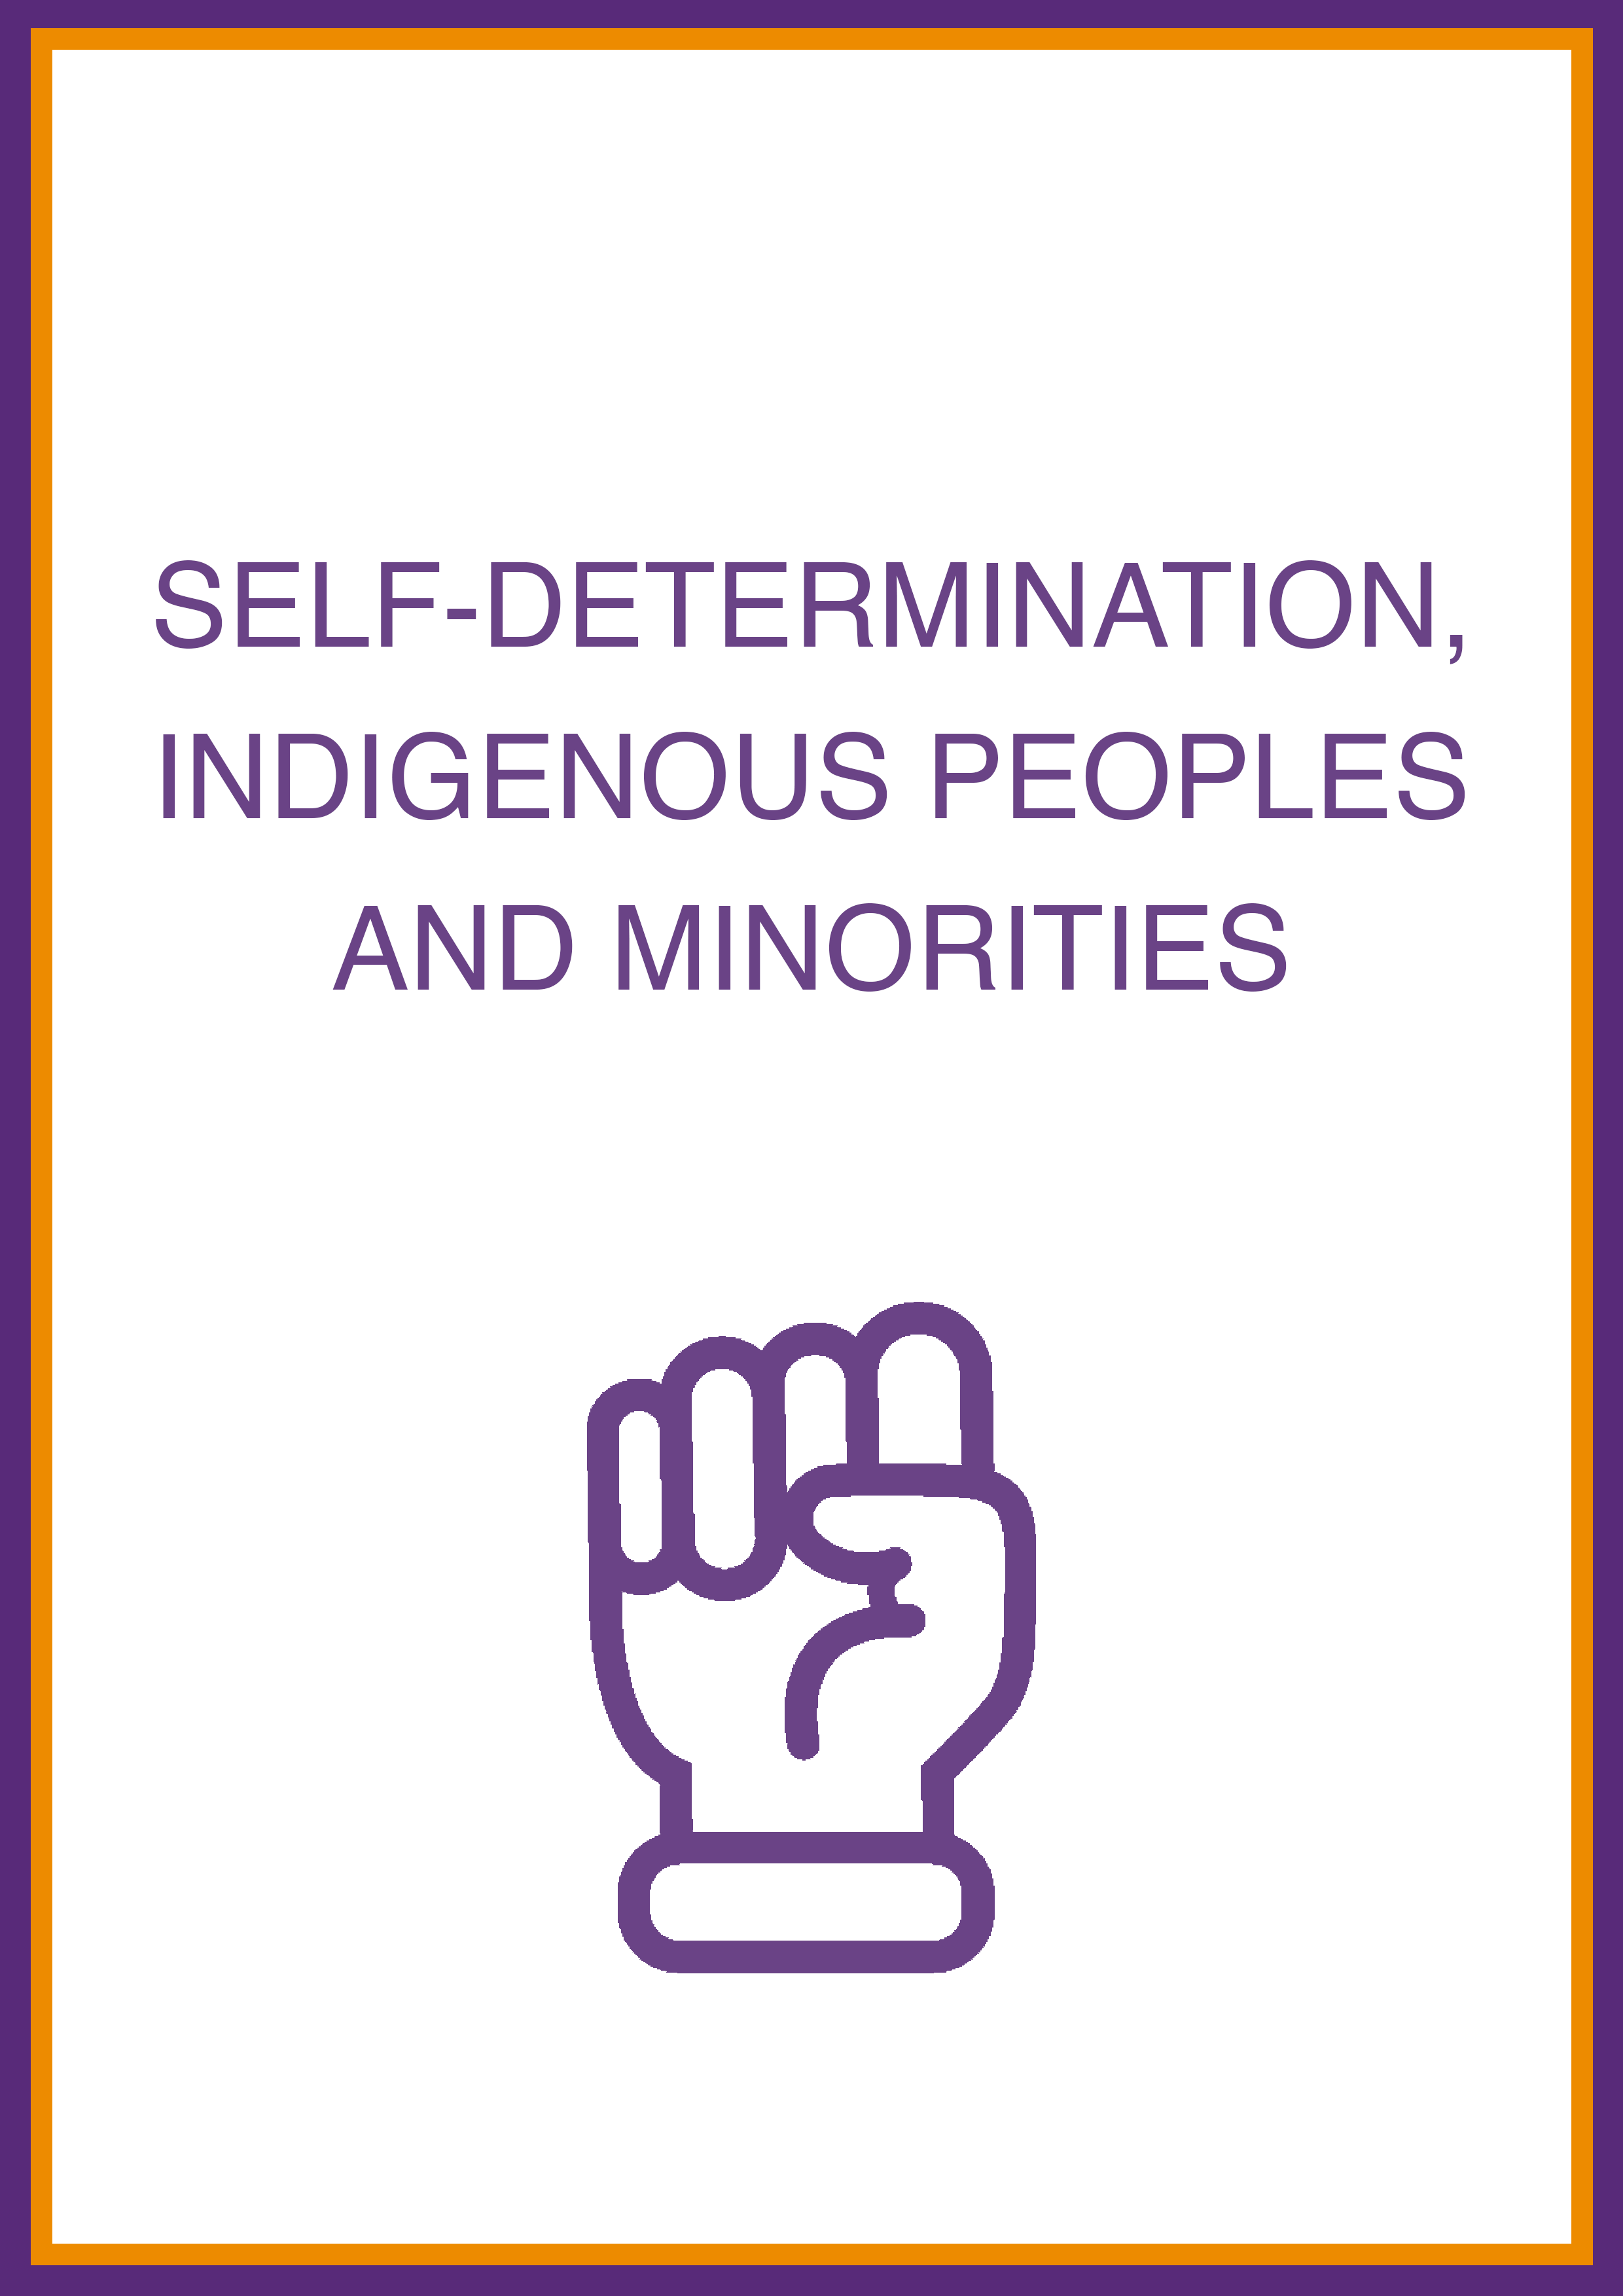 Cover art for: Self Determination, Indigenous Peoples and Minorities